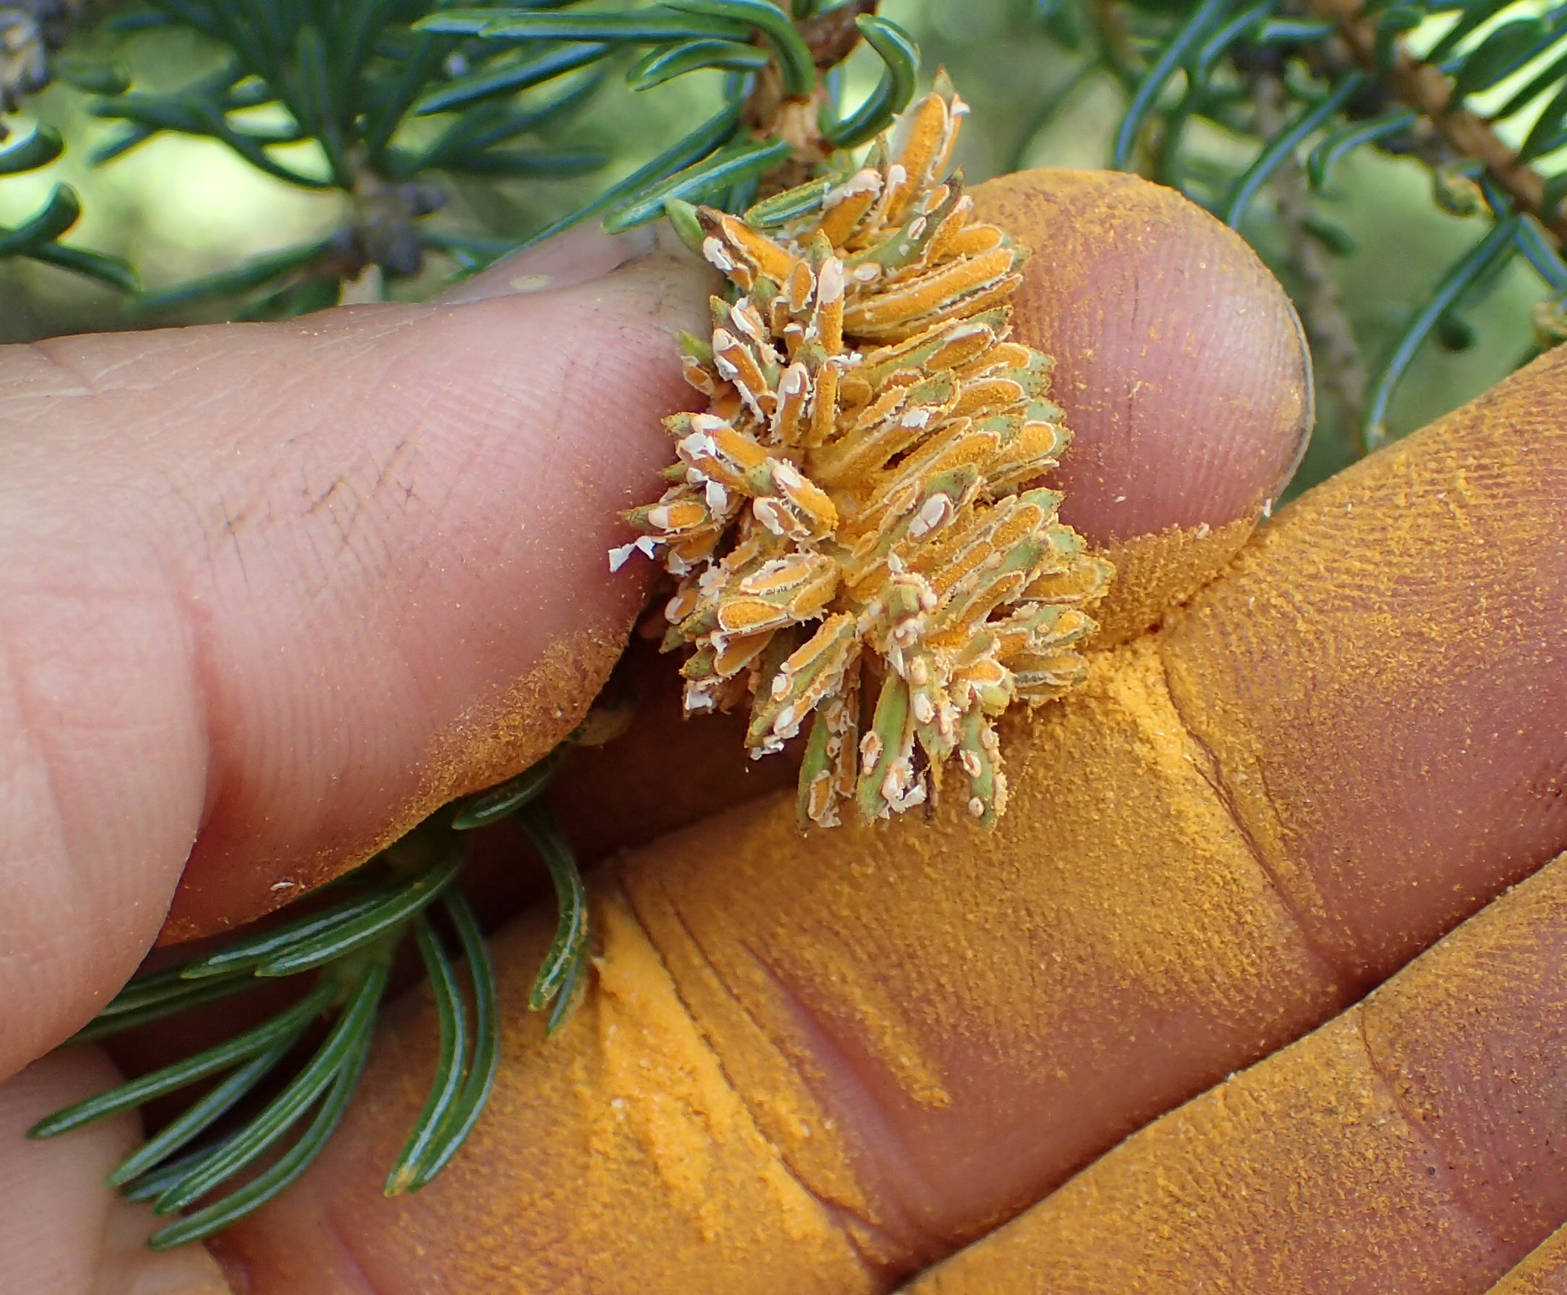 Bright orange spores are released from rupturing needles of a spruce tip infected with spruce tip rust on the Skyline Trail on July 5, 2018. (Photo provided by Matt Bowser of the U.S. Fish and Wildlife Service)